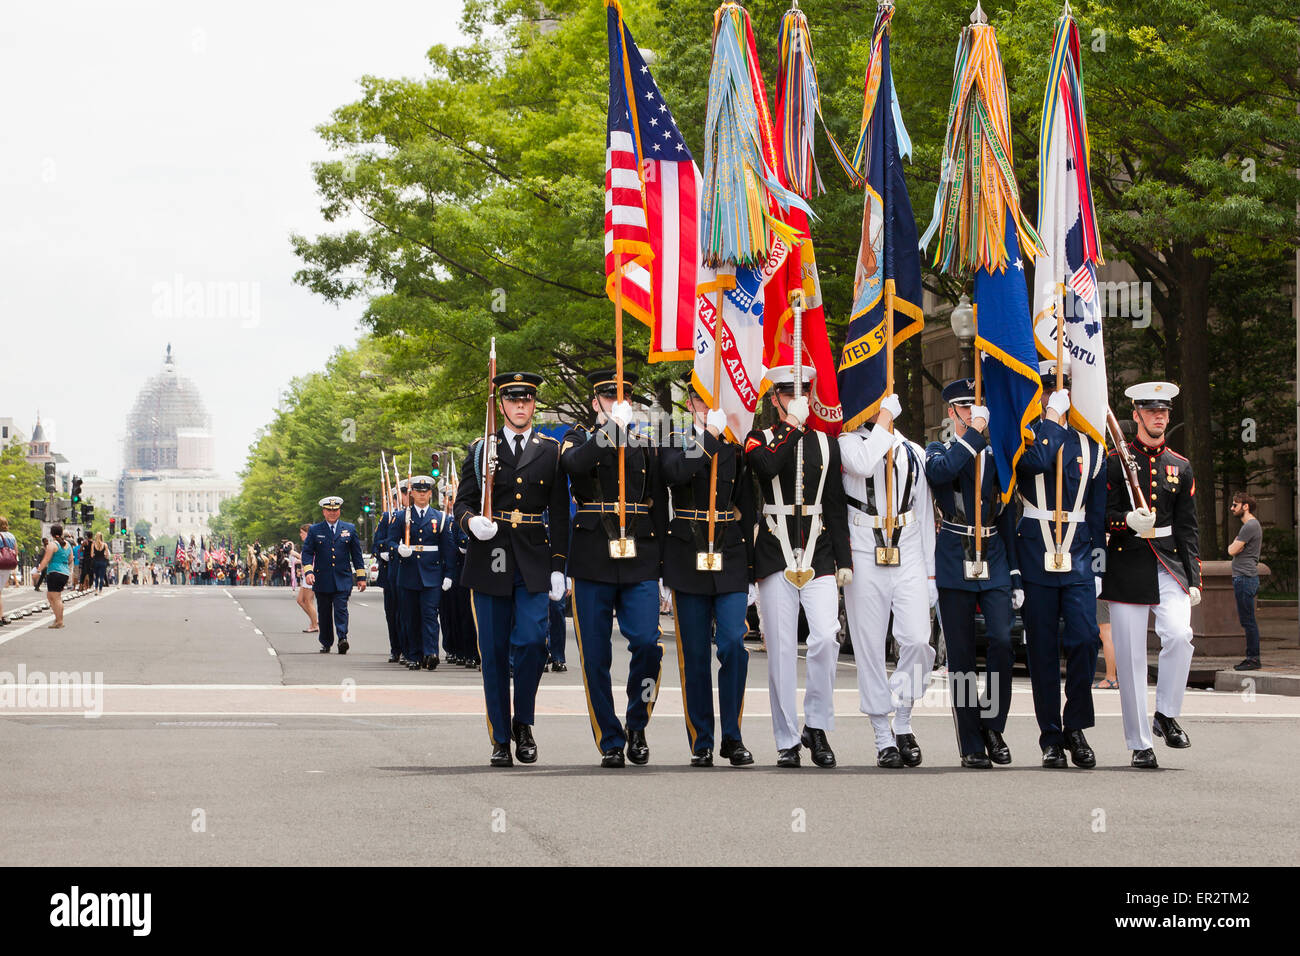 Joint Service Honor Guard marching during the 150 year anniversary of the Grand Review Parade - Washington, DC USA Stock Photo